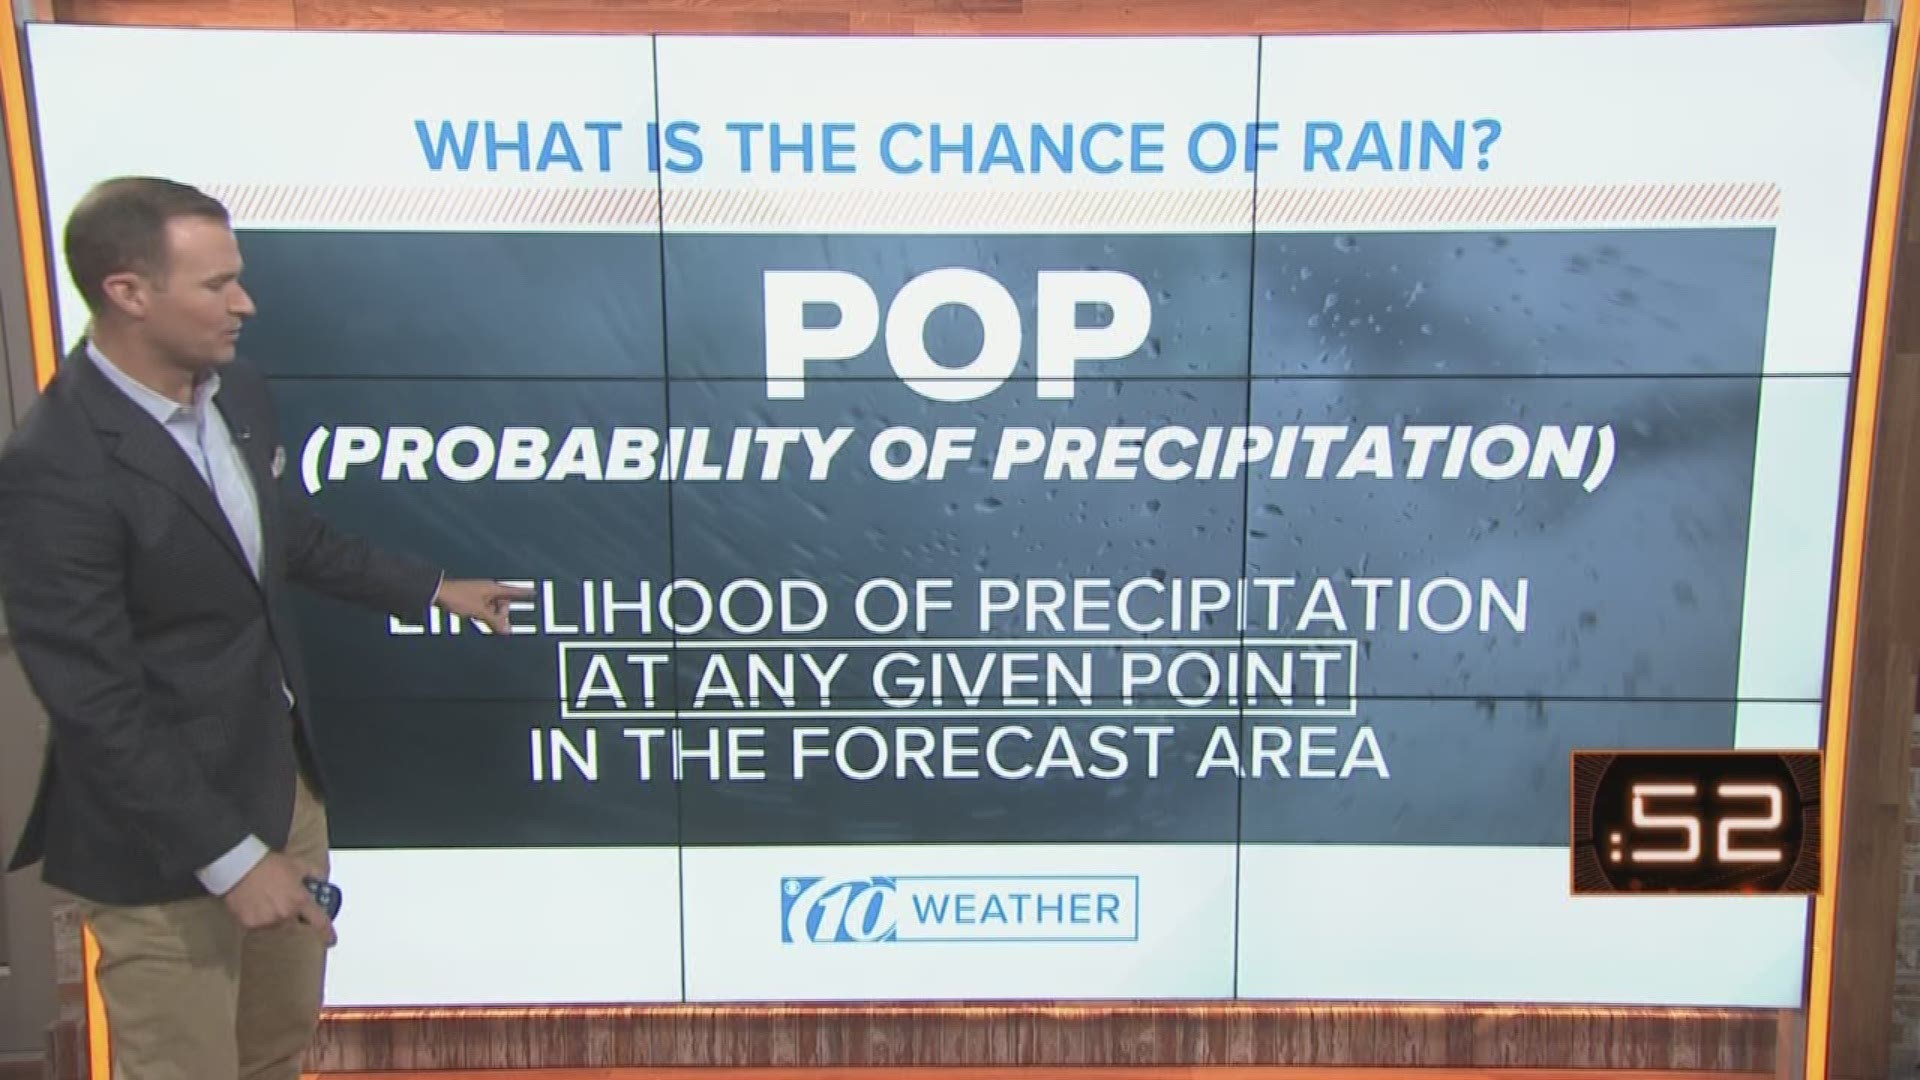 The probability of precipitation is the likelihood of precipitation at any given point in the forecast area.